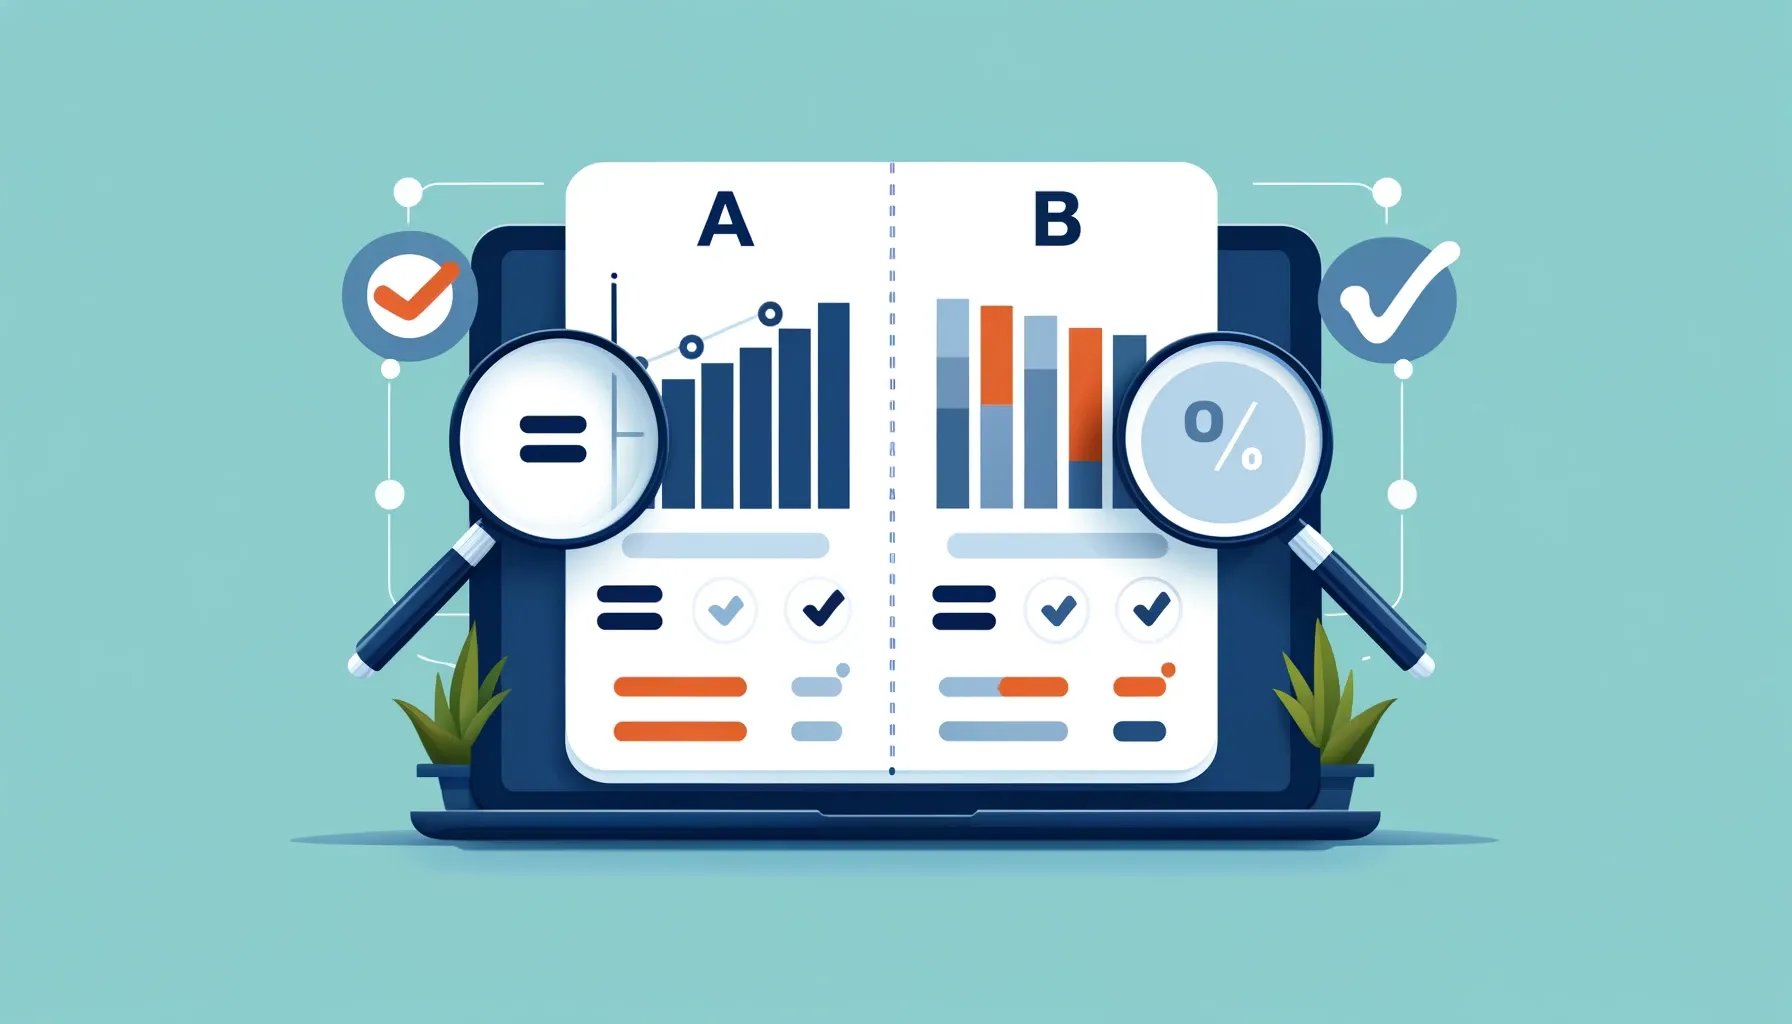 A/B Testing Best Practices - Essential Tips for Optimizing Your Experiments